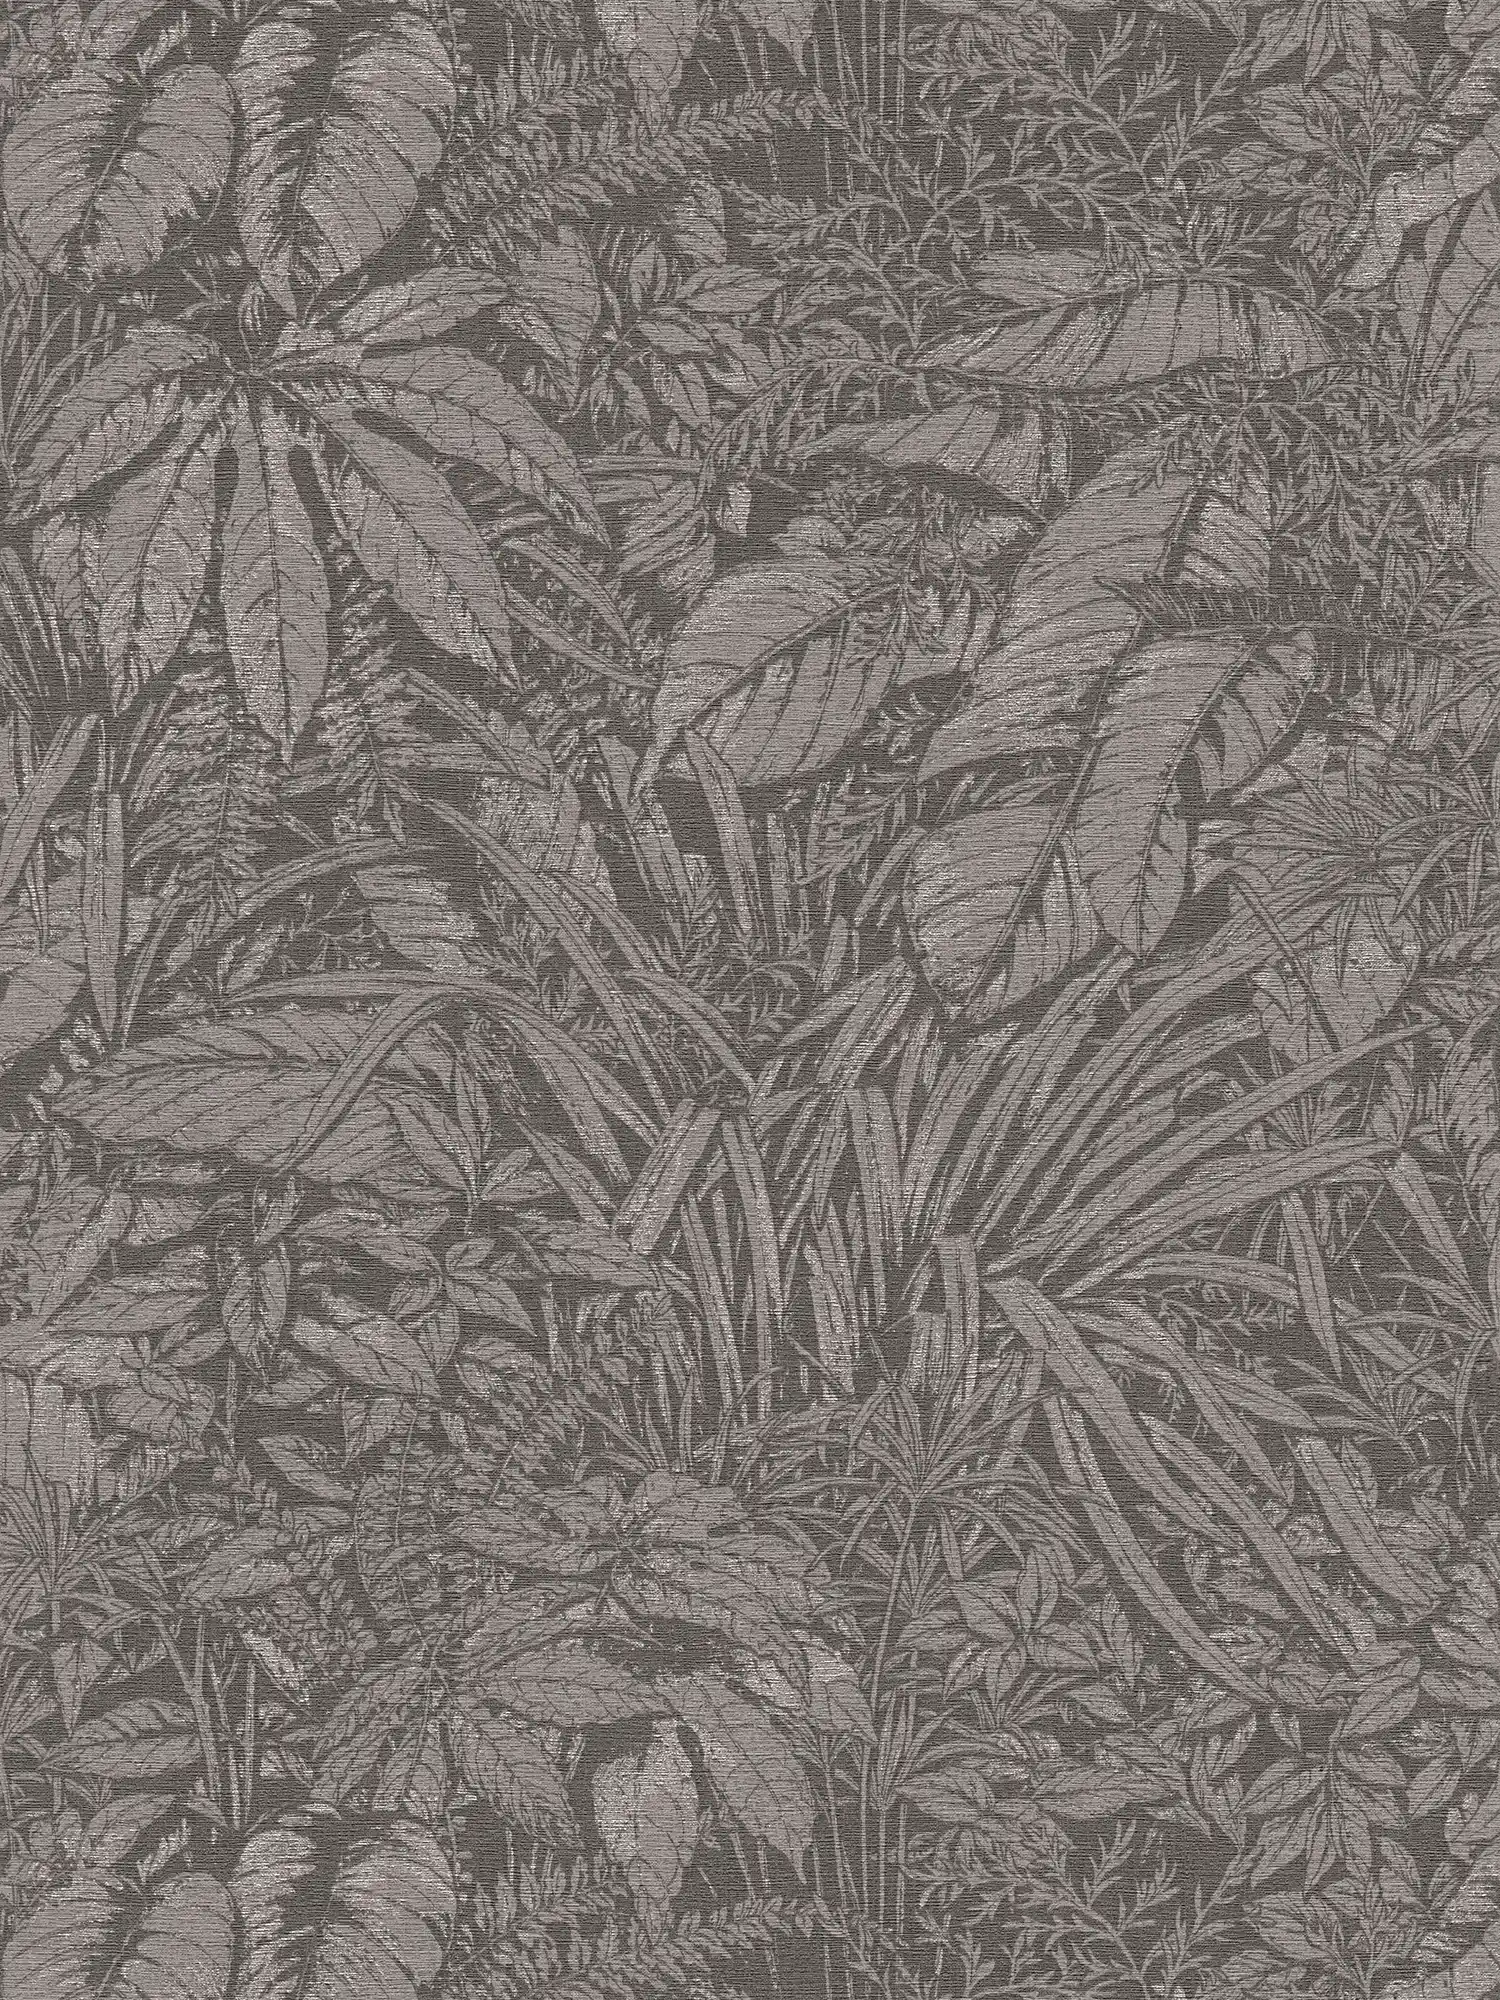 Non-woven wallpaper with floral leaf pattern - grey, black, silver
